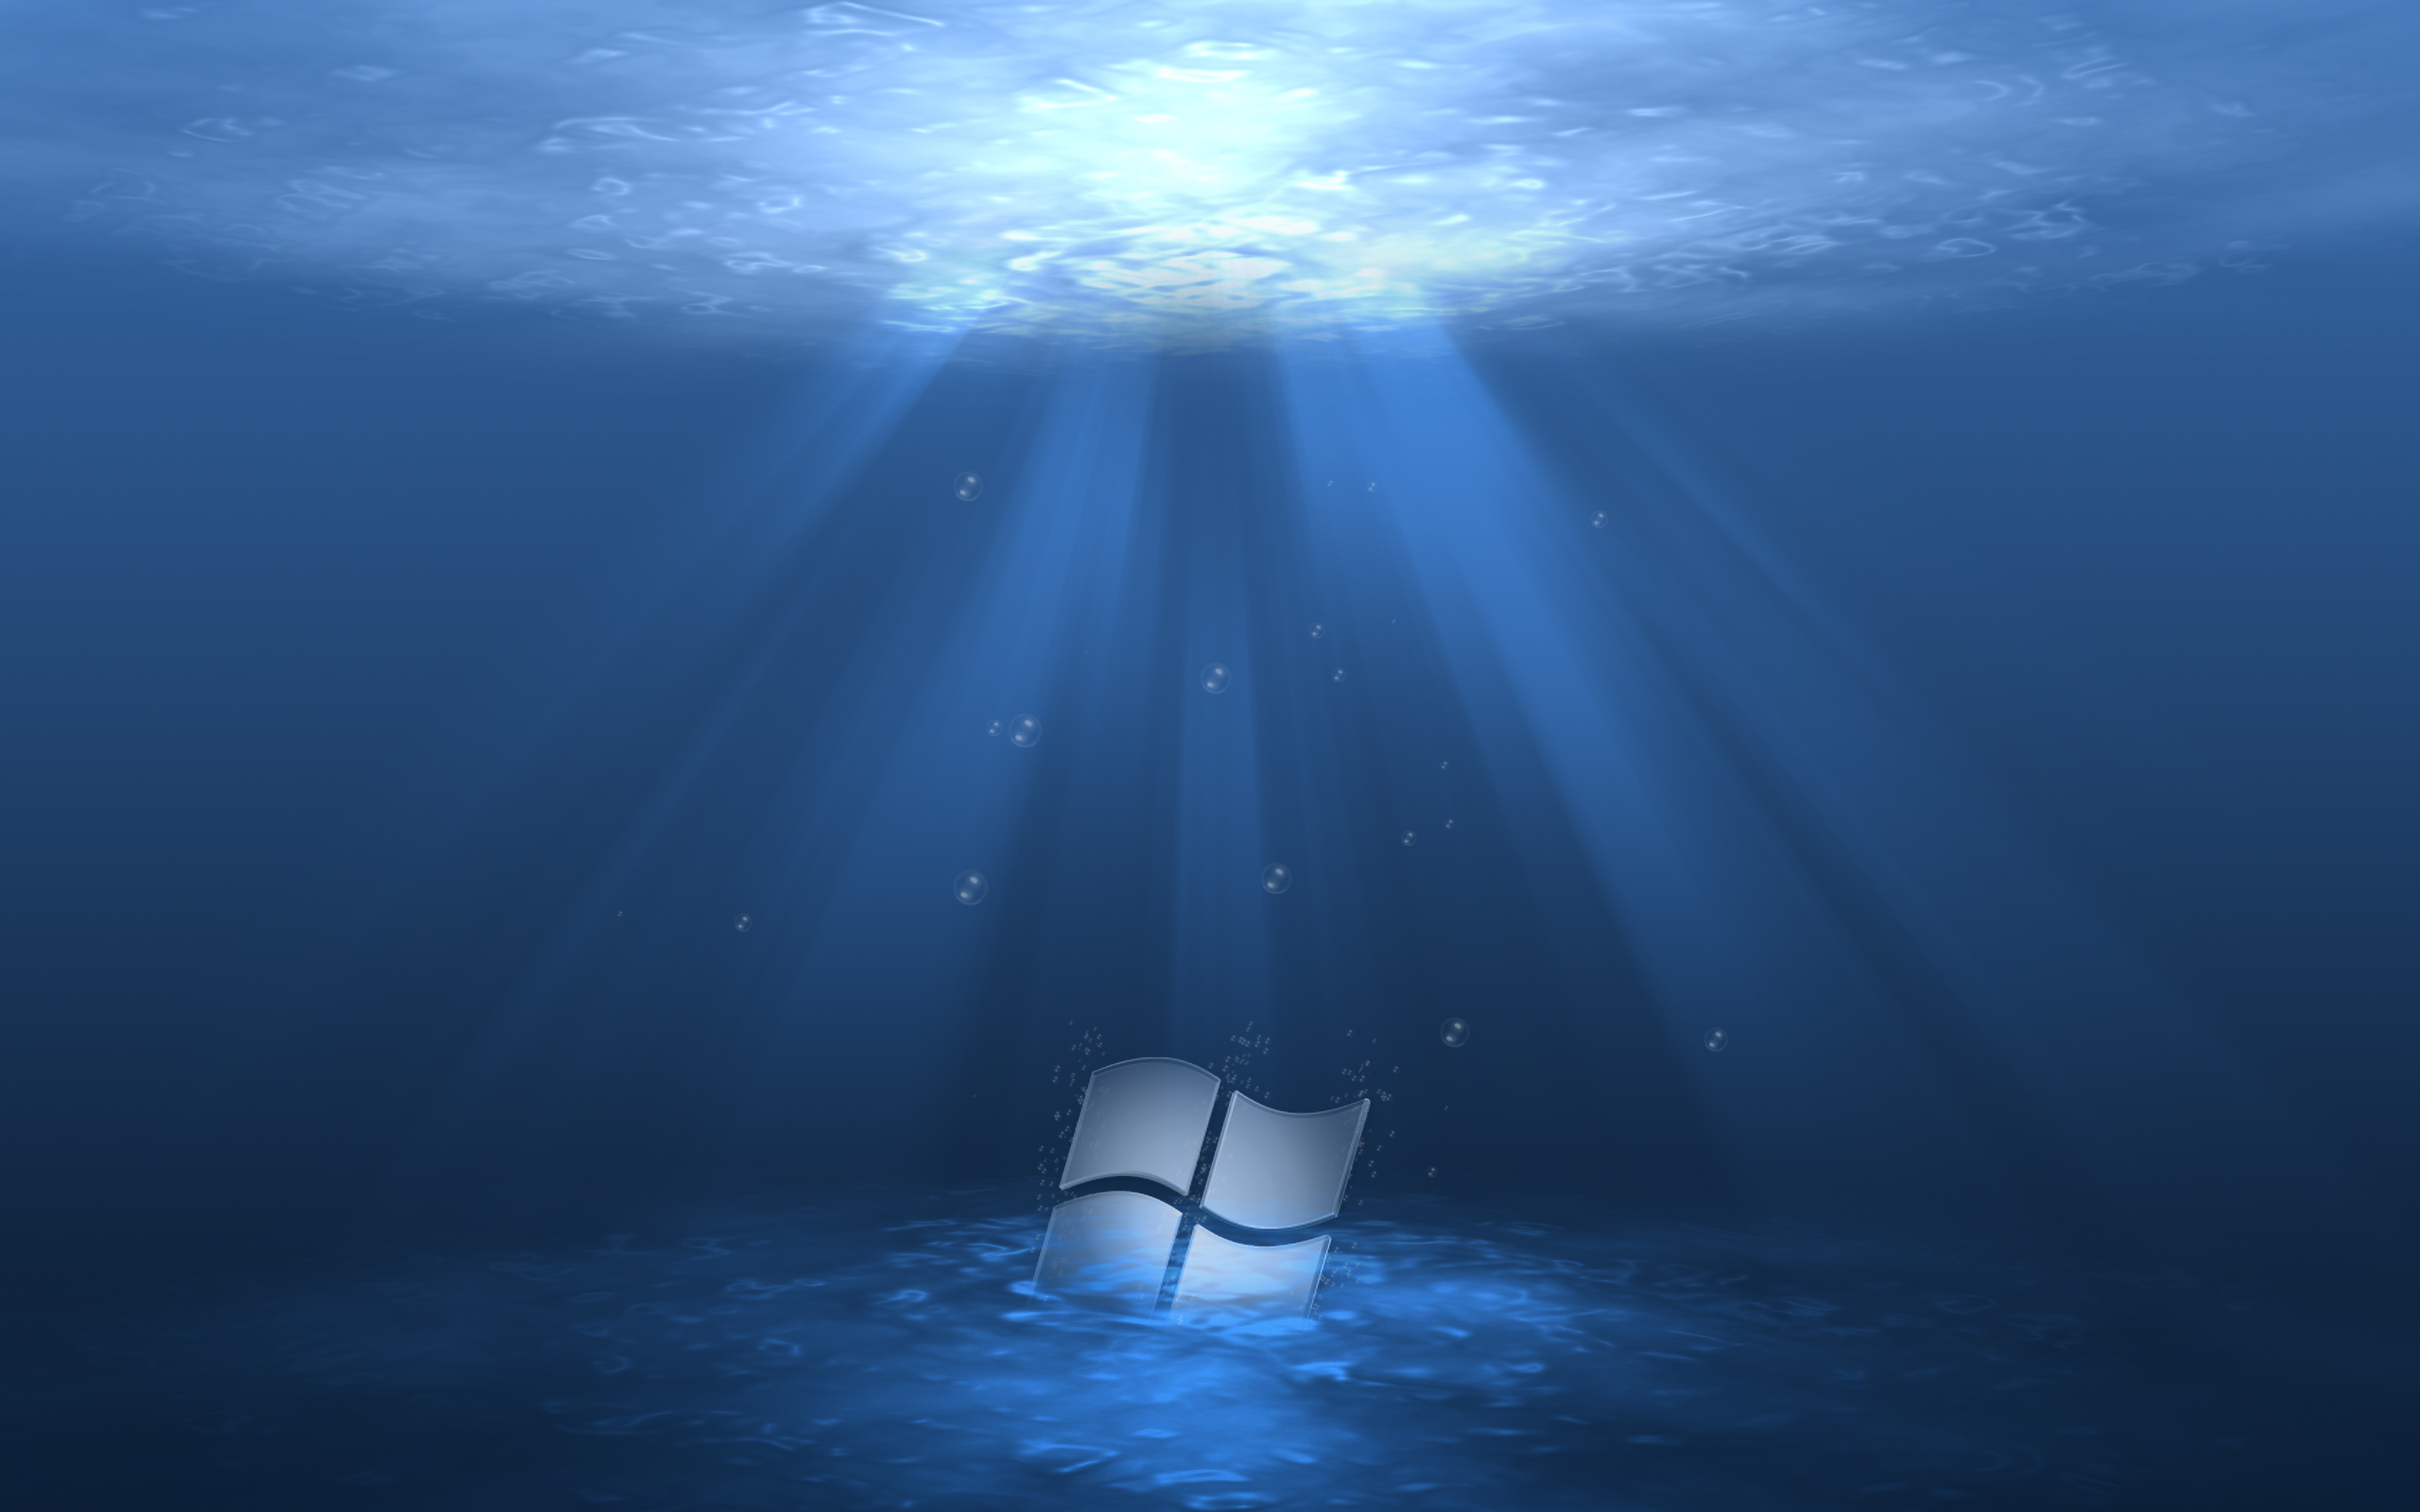 underwater animated wallpapers for windows 7